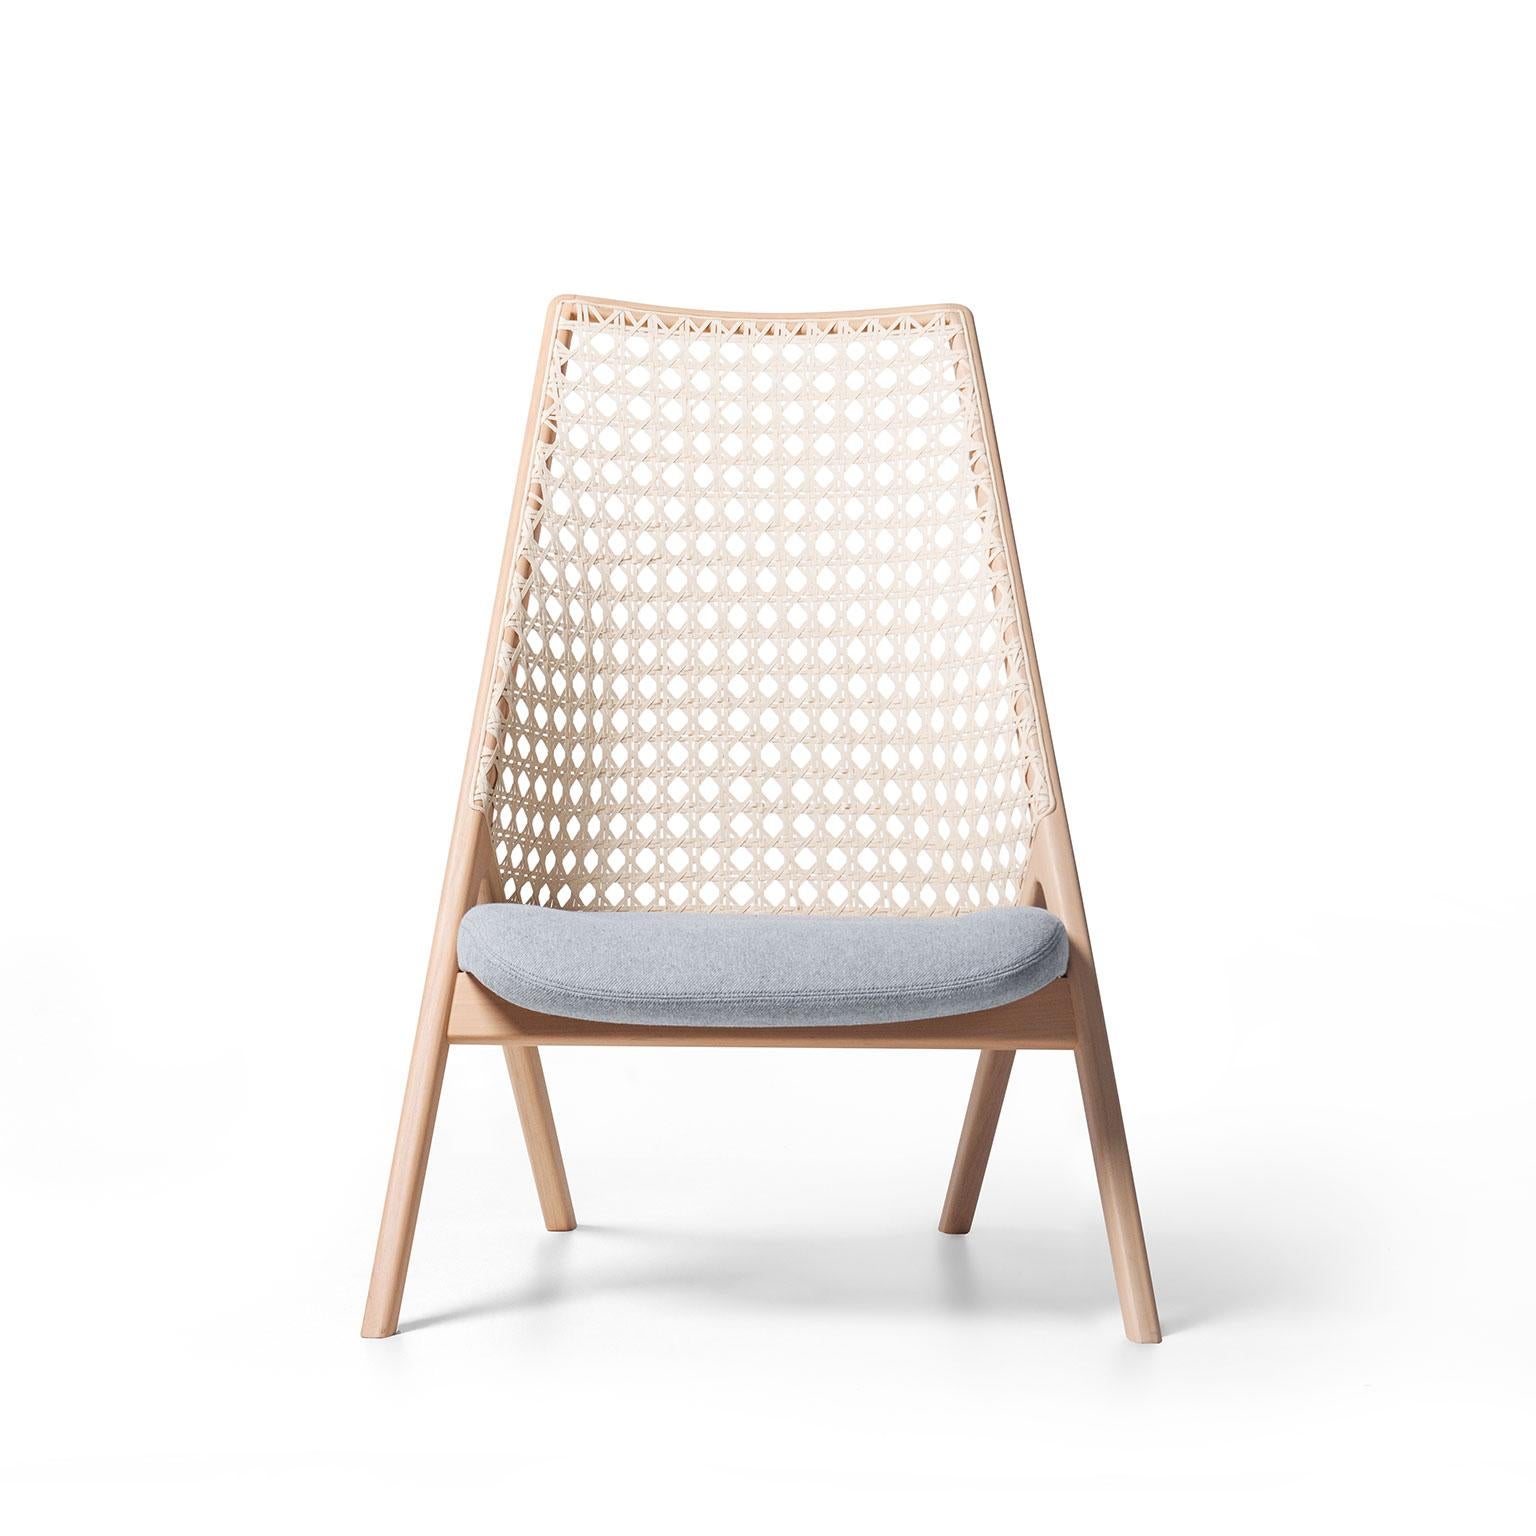 Modern Tela Lounge Chair in Recycled Cotton, by Wentz, Brazilian Contemporary Design For Sale